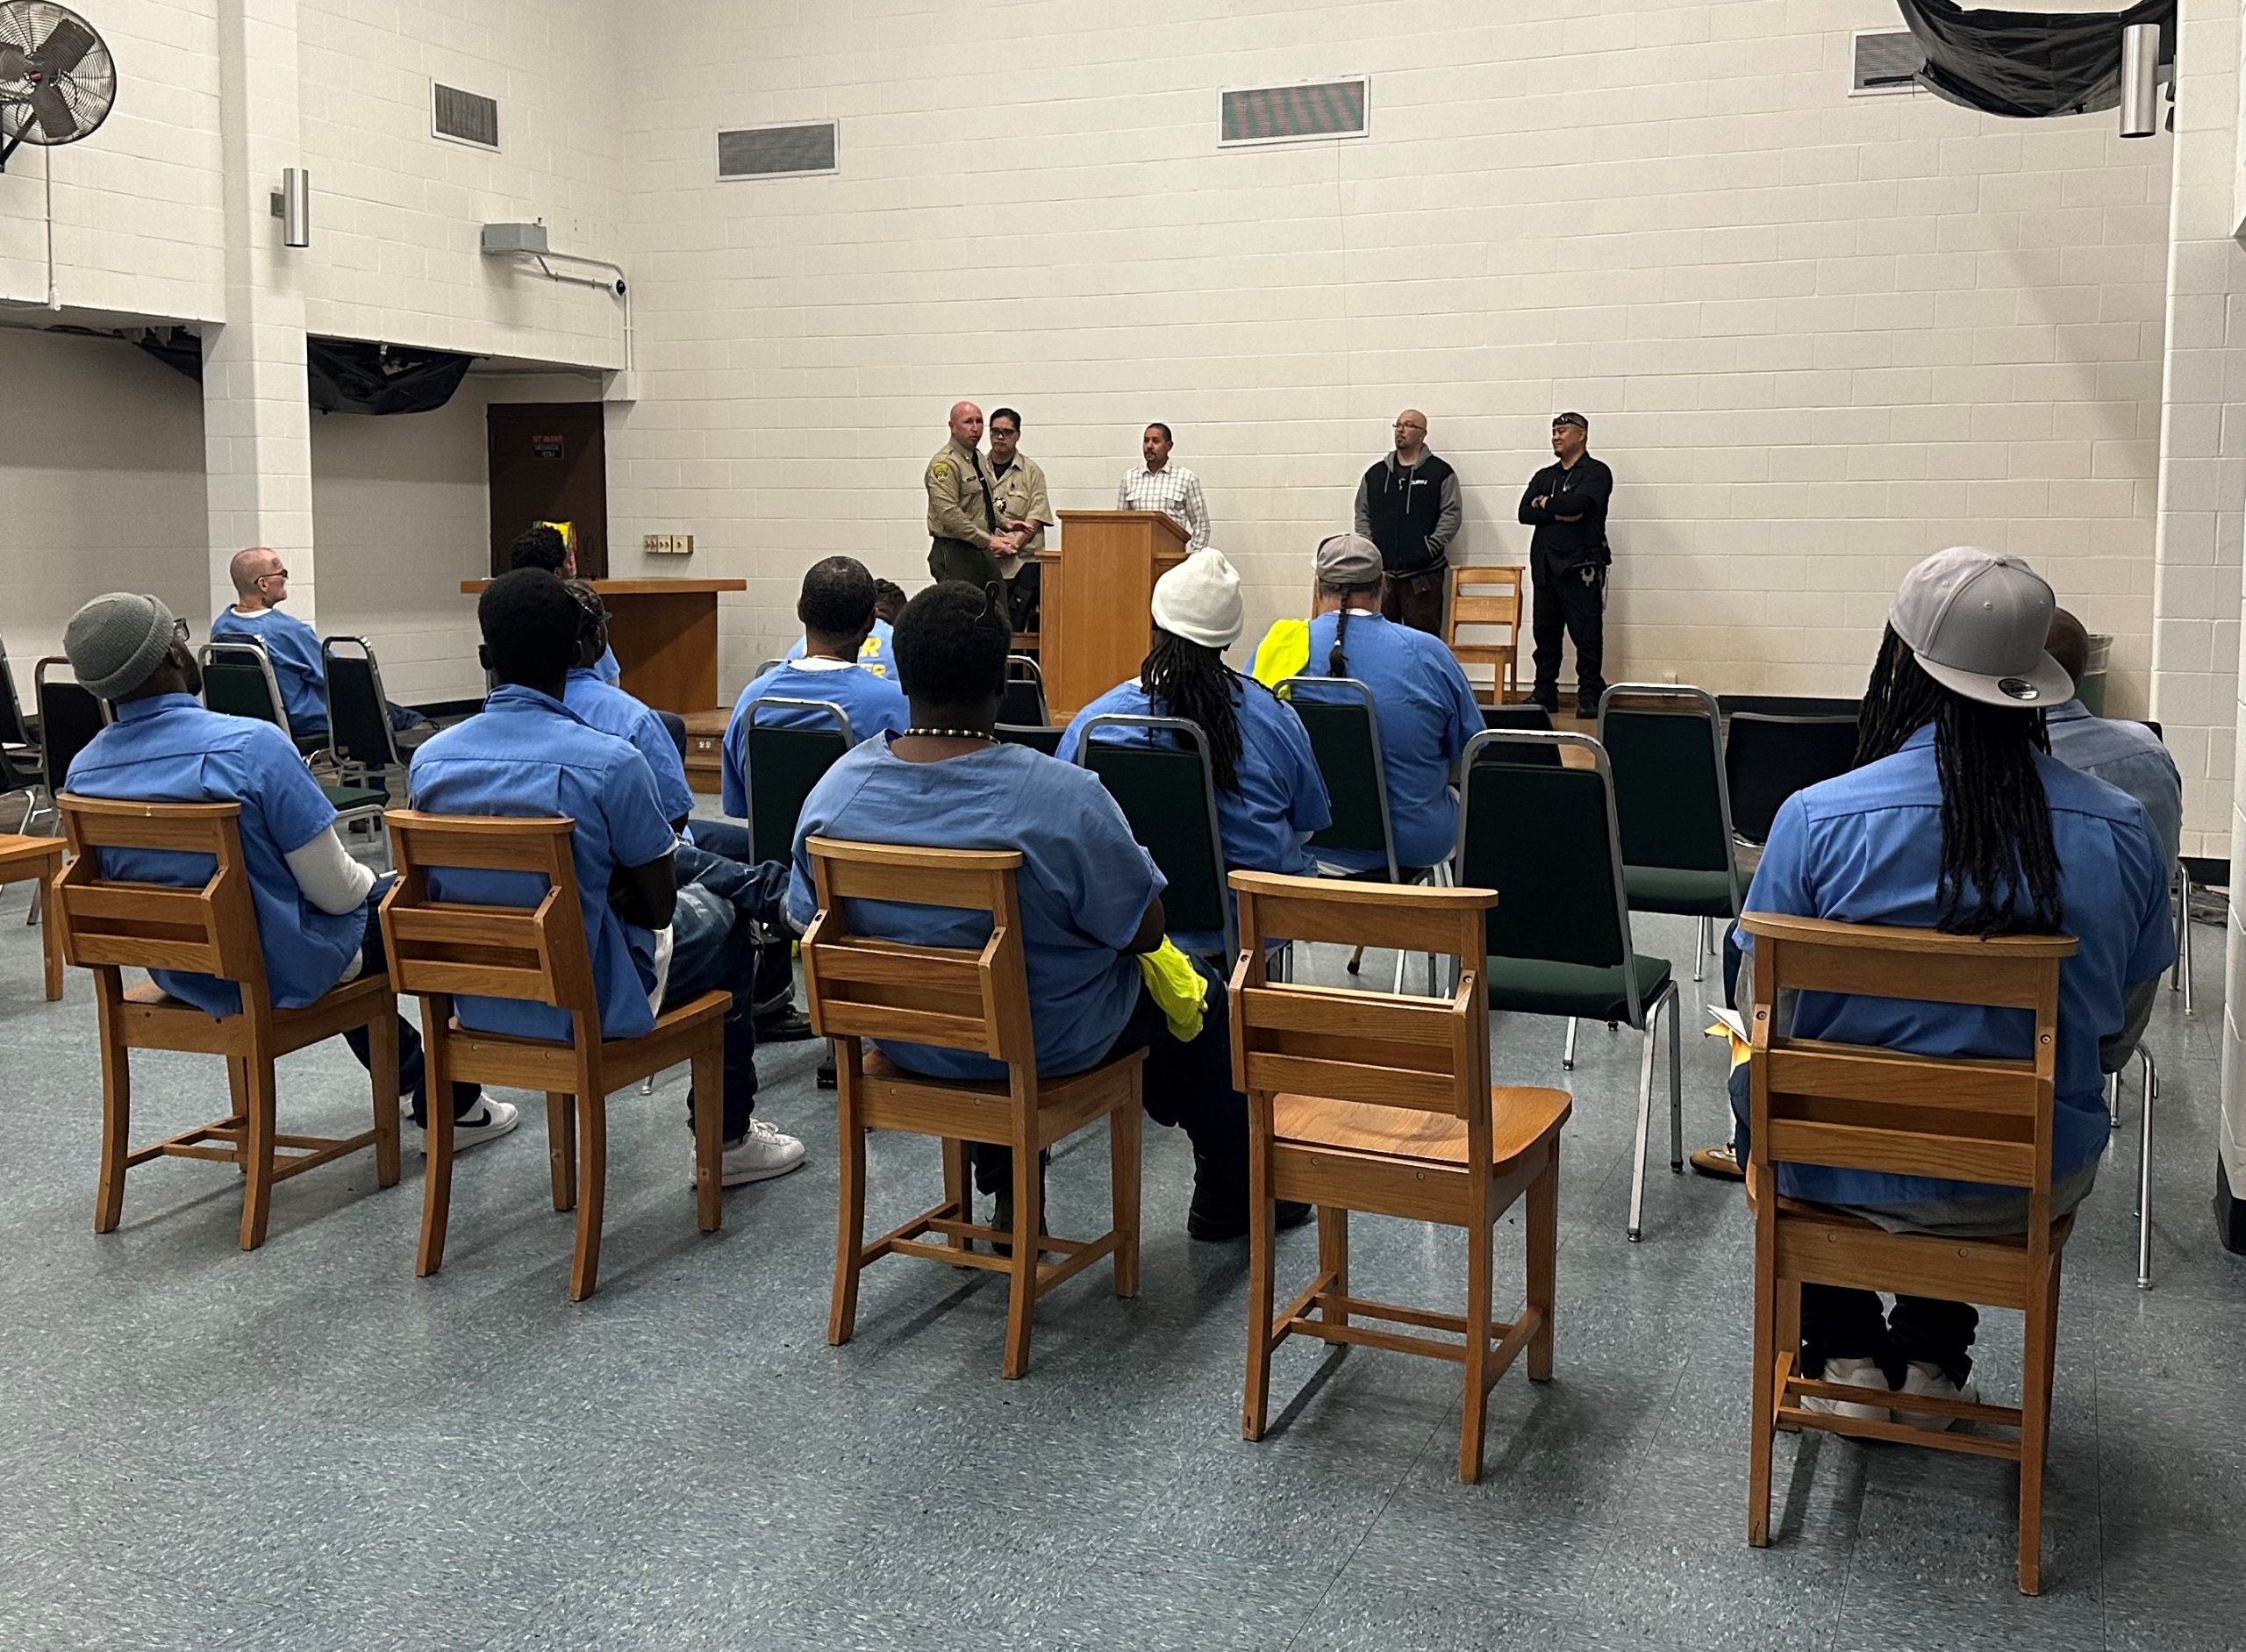 Incarcerated people sit in front of a stage as they listen to parole agents and two formerly incarcerated people.